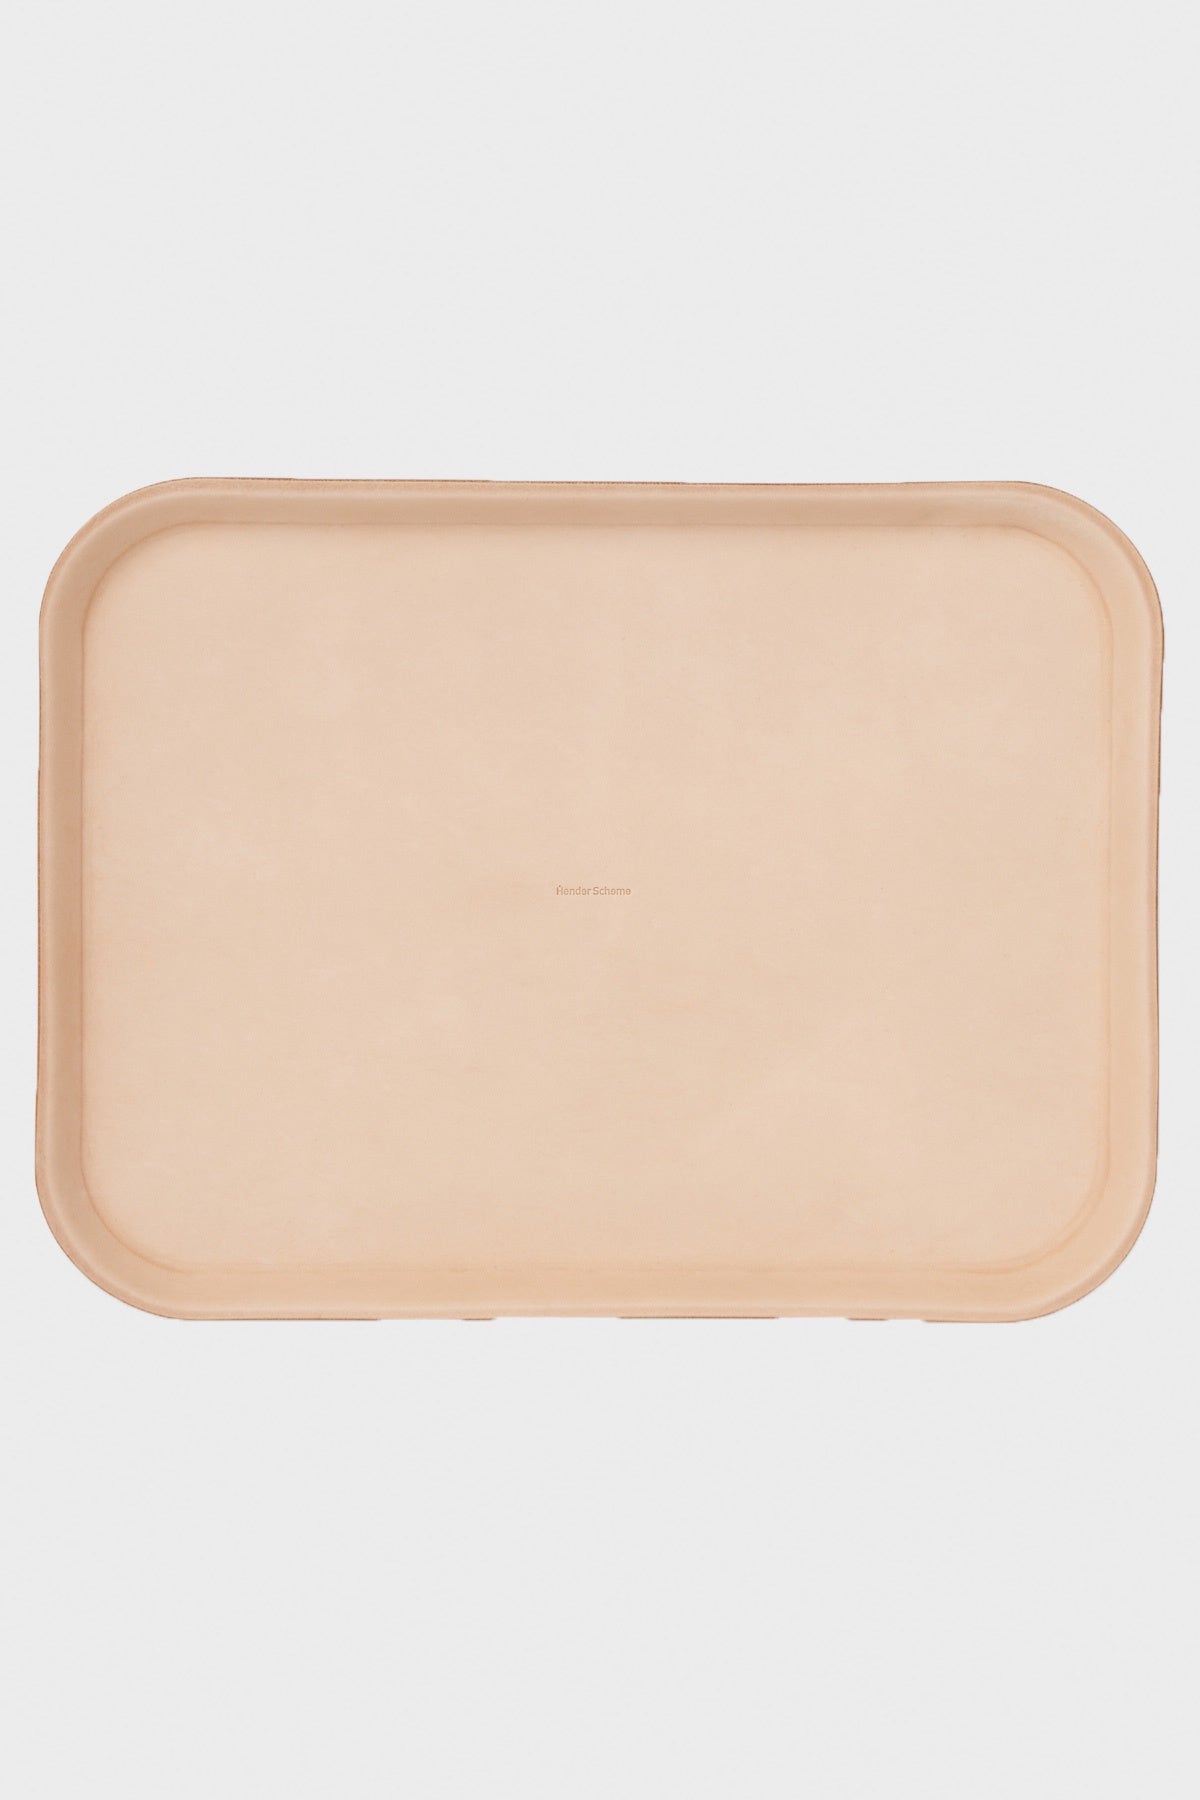 Large Leather Tray - Natural